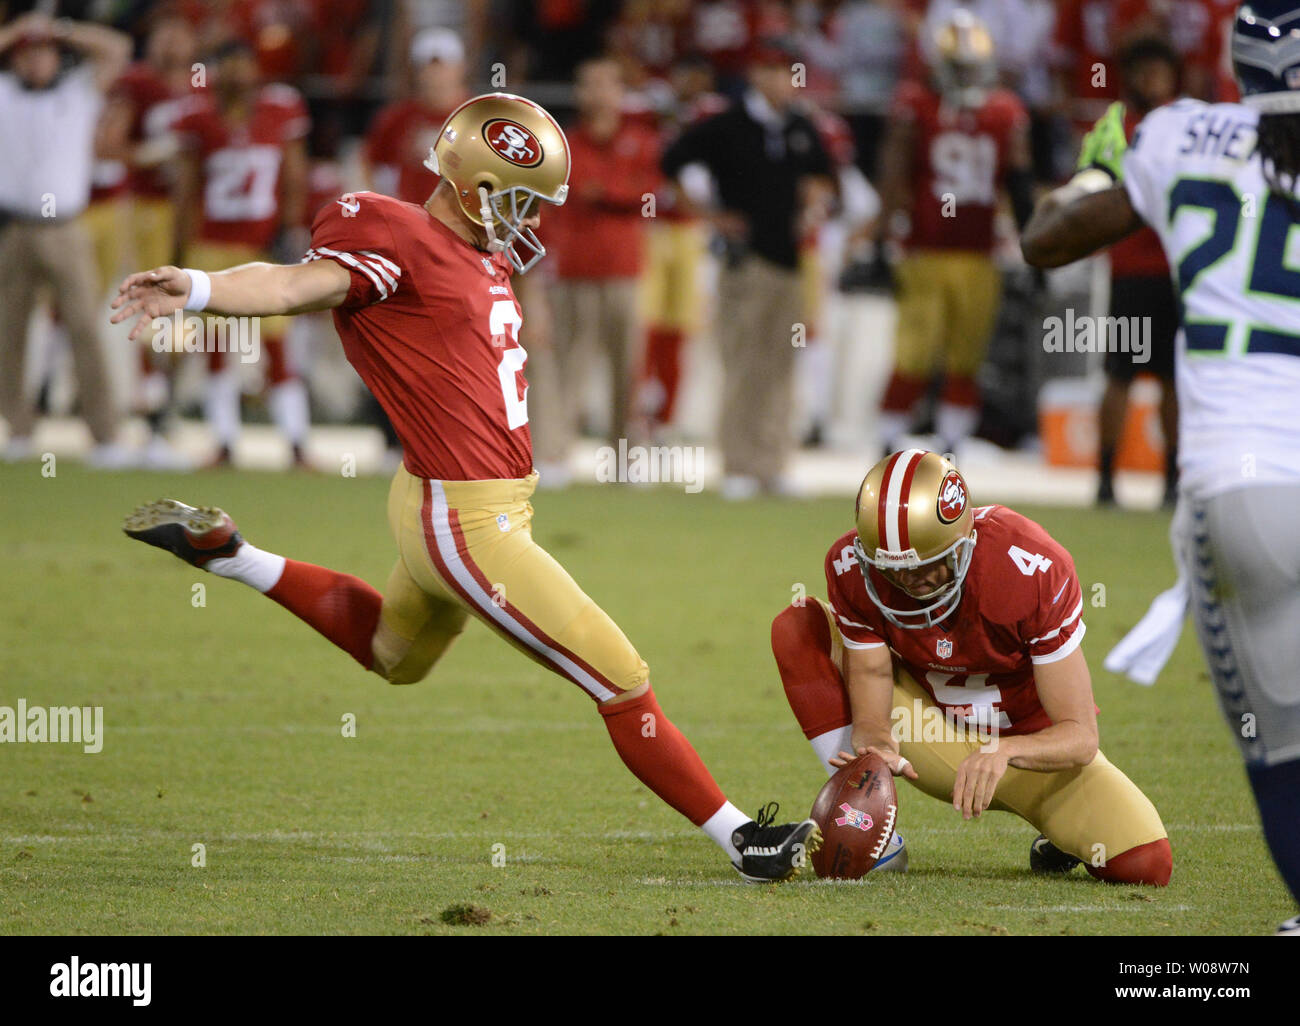 2014 NFC Championship game, 49ers vs. Seahawks: Seattle punches